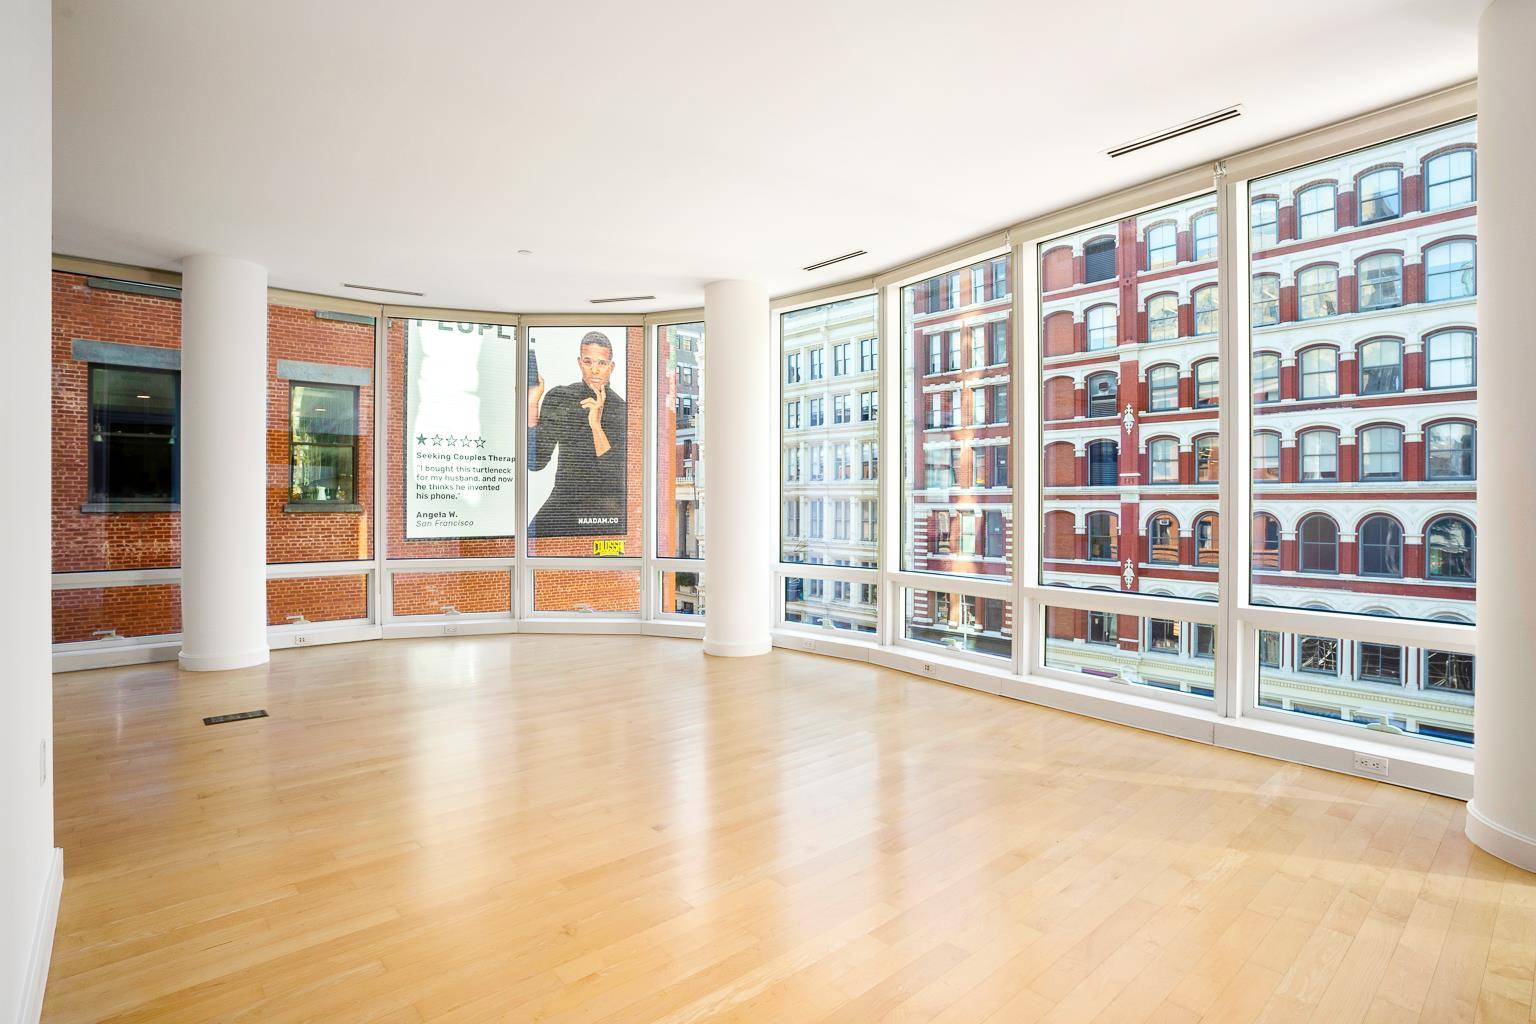 Museum quality architectural convertible 3 bedroom corner loft currently being offered for rent at the Gwathmey and Siegel designed Astor Place.